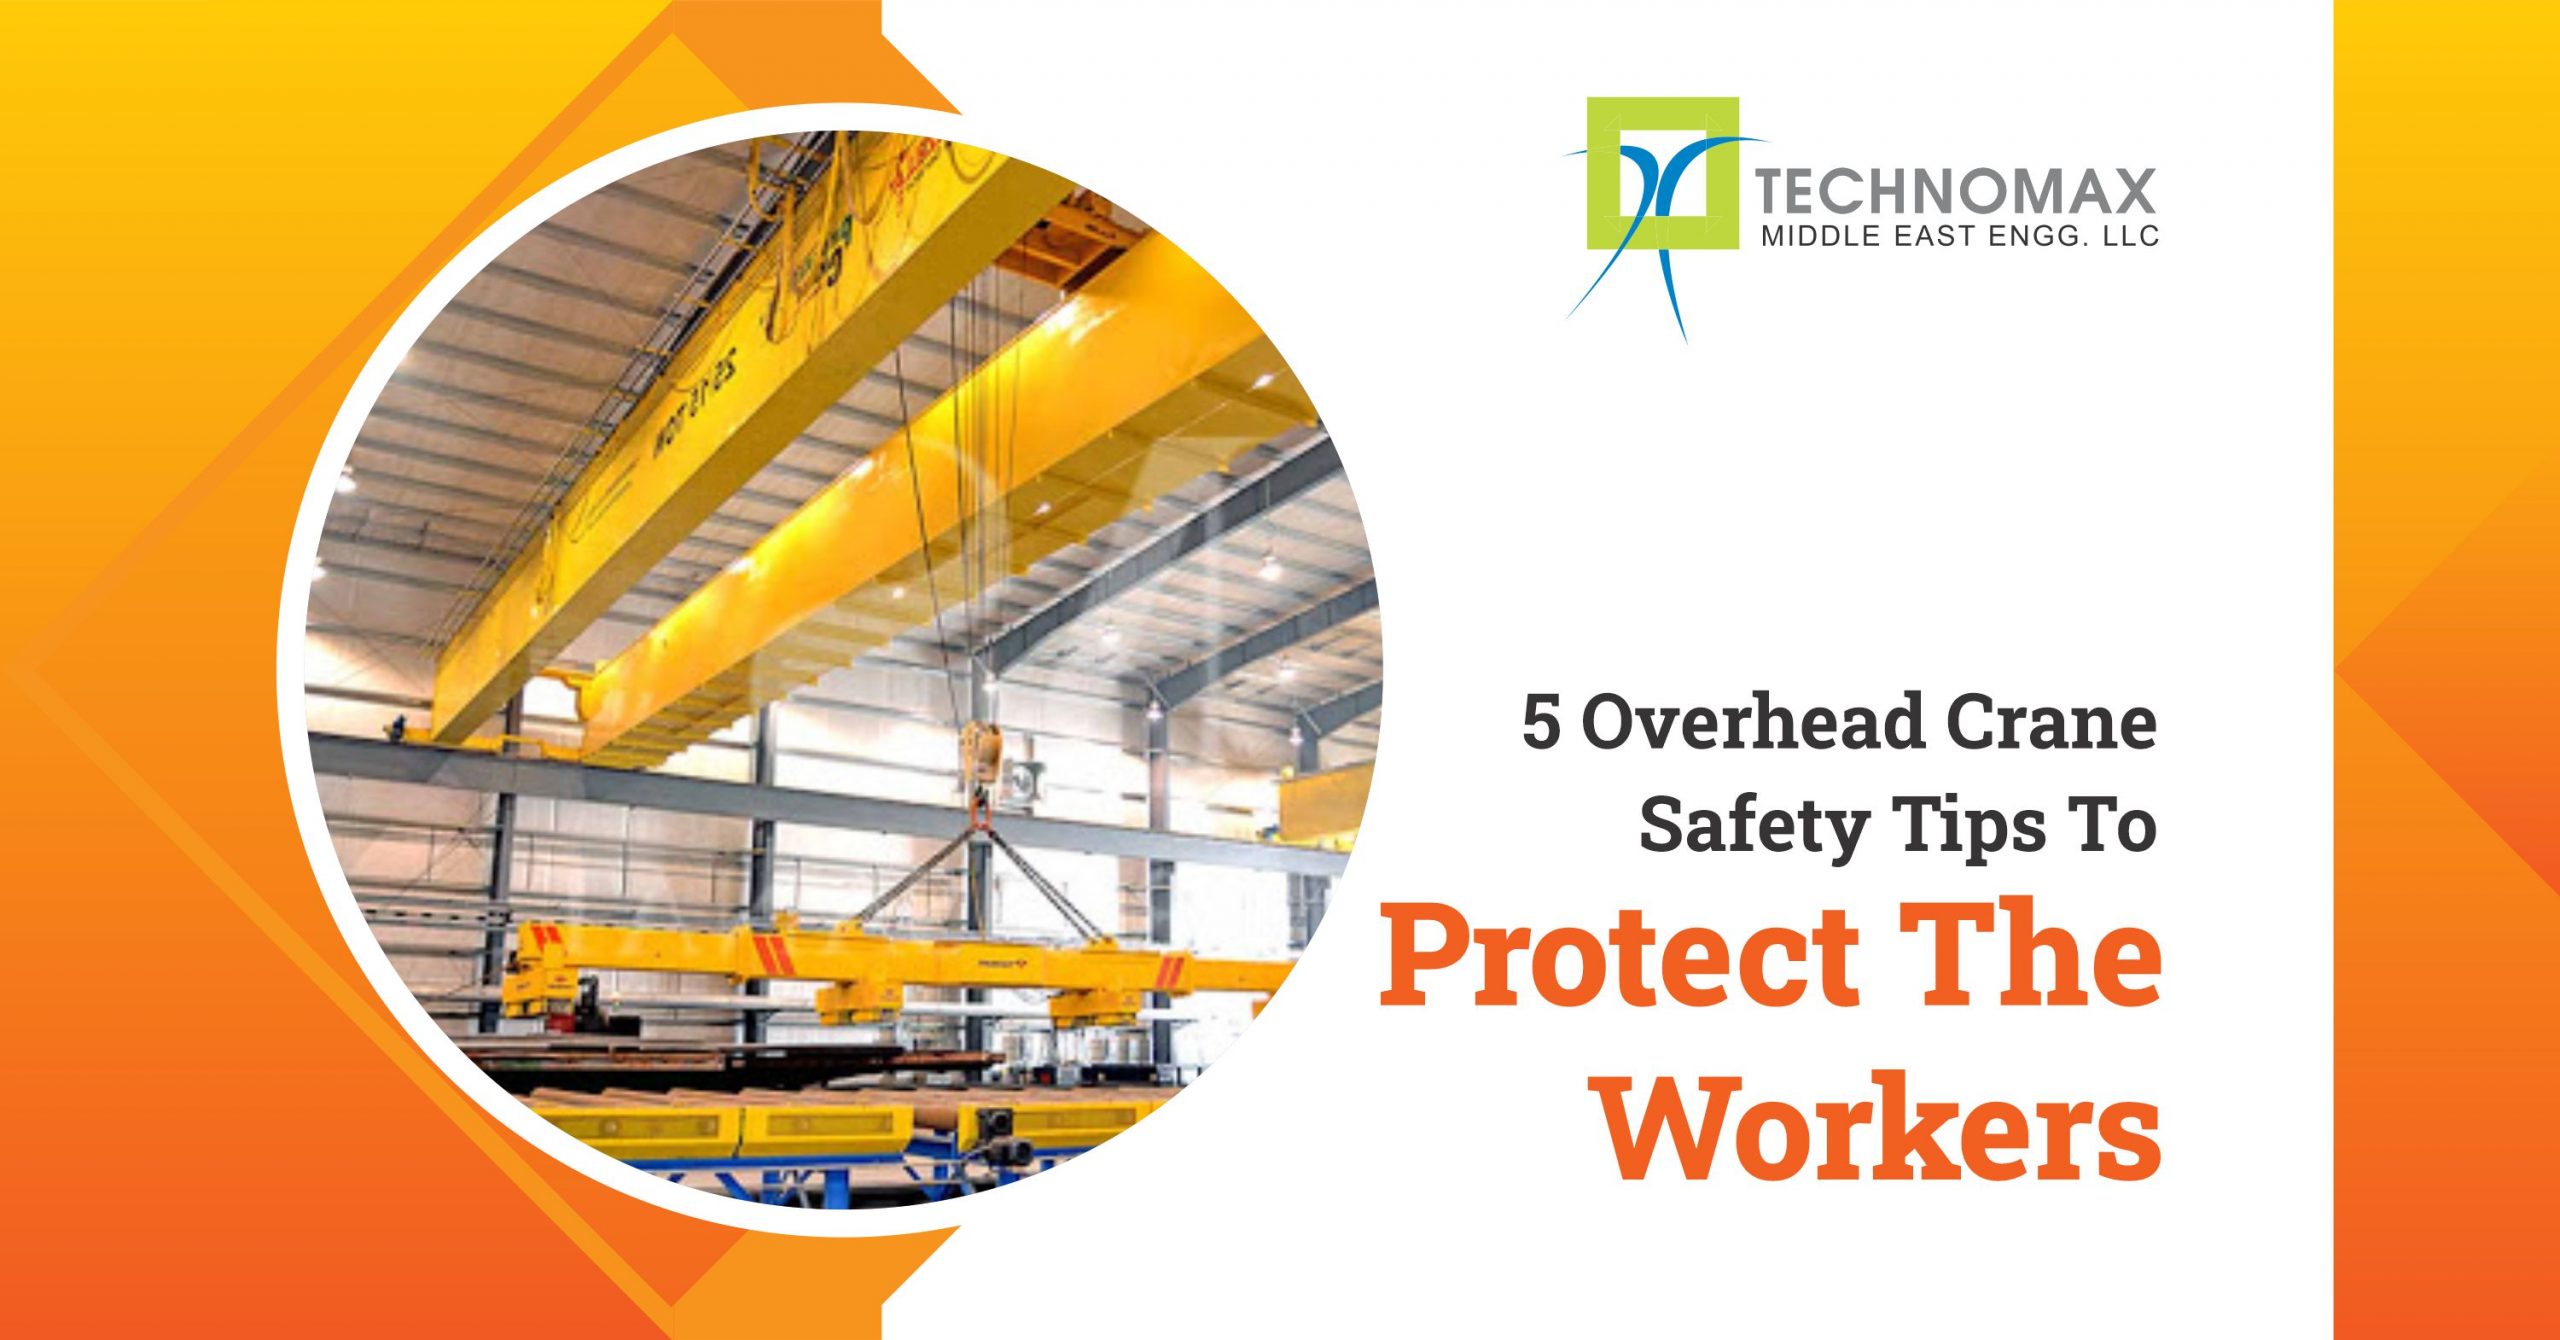 5 Common Safety Tips For Overhead Crane Operation